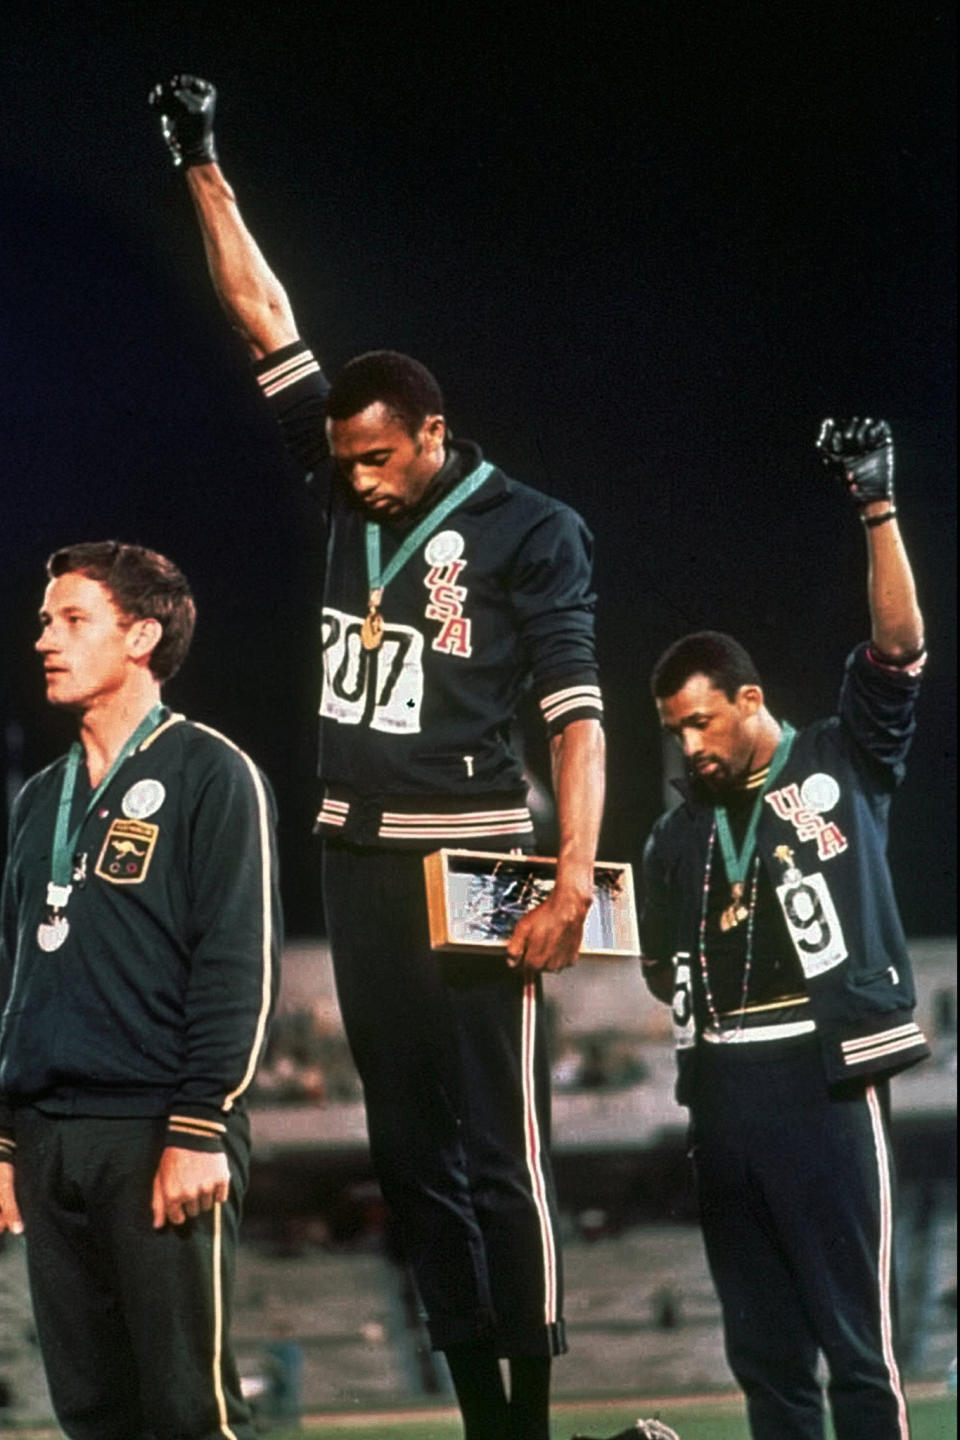 Tommie Smith and John Carlos raise their gloved fists after Smith received the gold and Carlos the bronze for the 200 meter run at the Summer Olympic Games in Mexico City. - Credit: AP Image